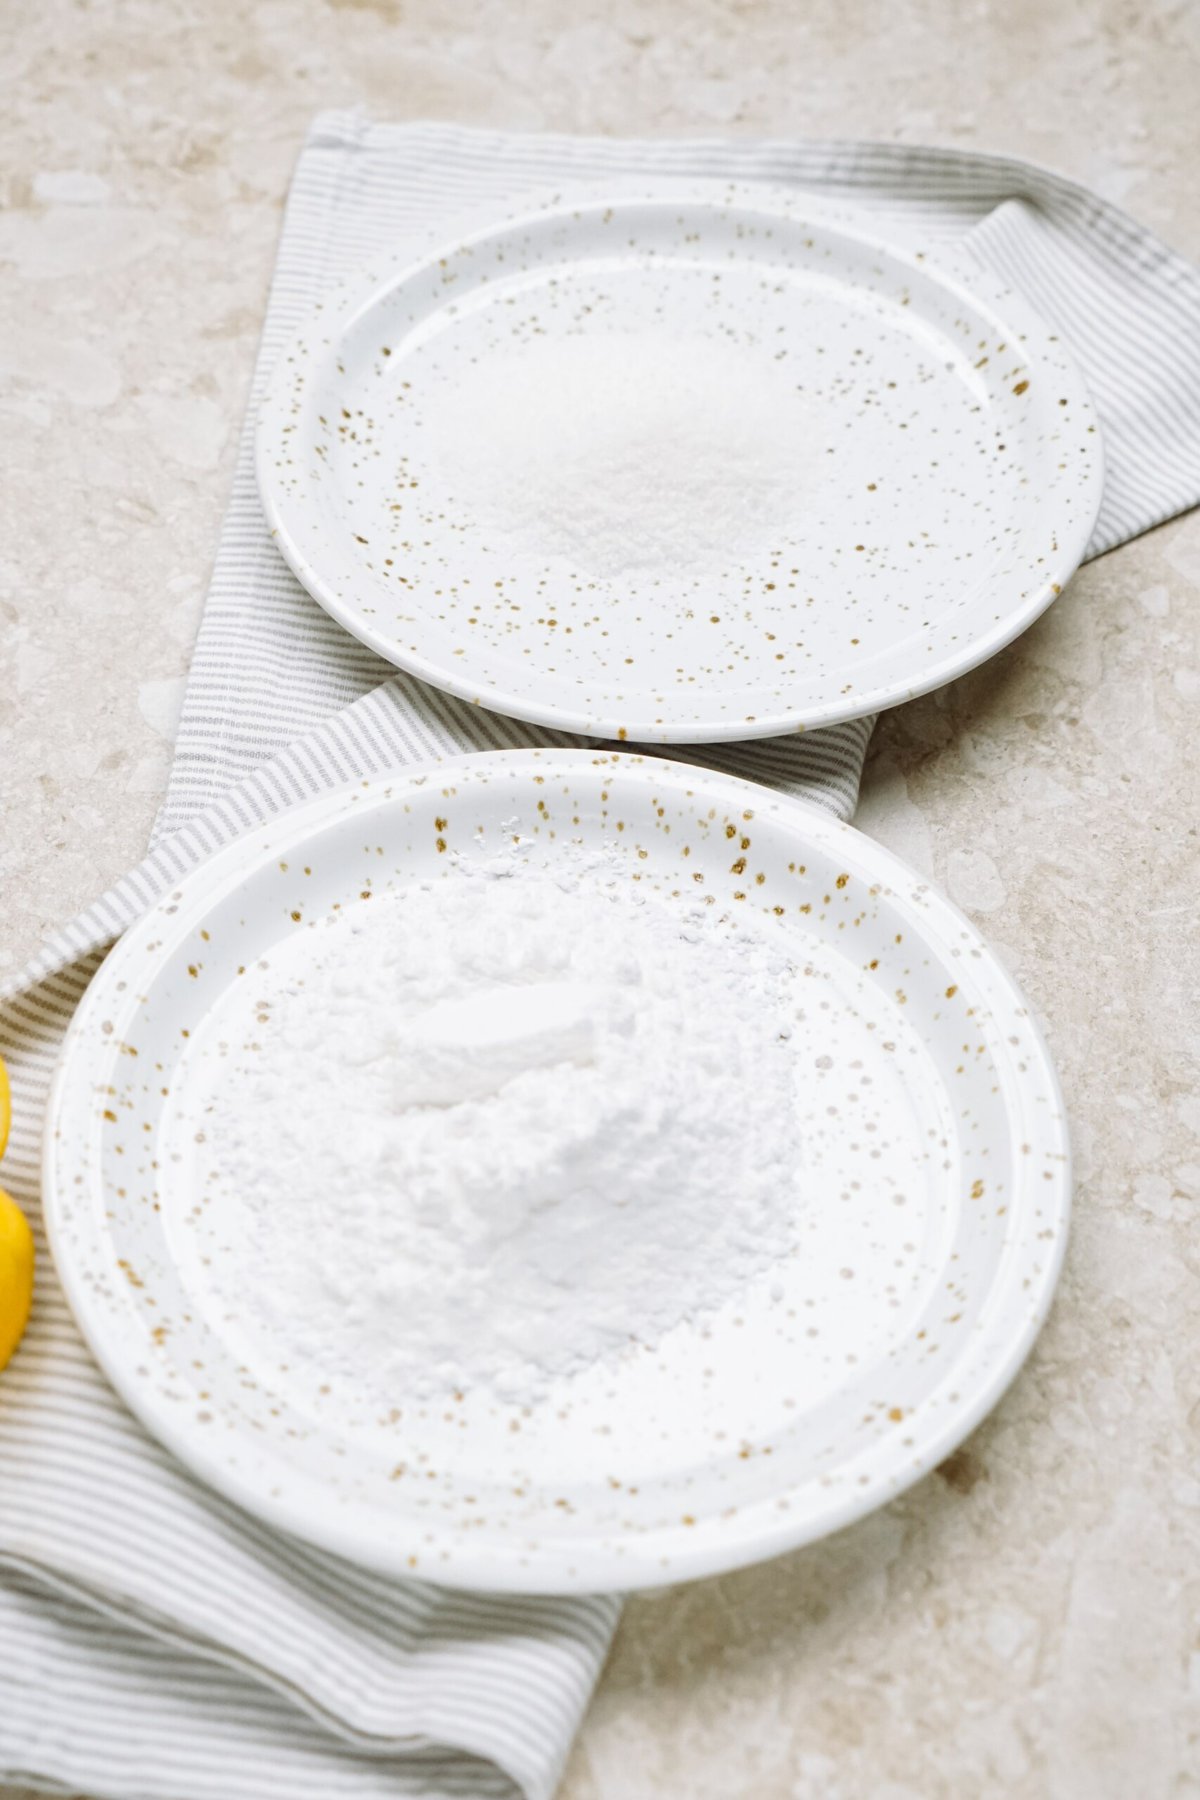 Two white, speckled plates with powdered sugar on a marble surface, one plate partially covering a striped cloth napkin.